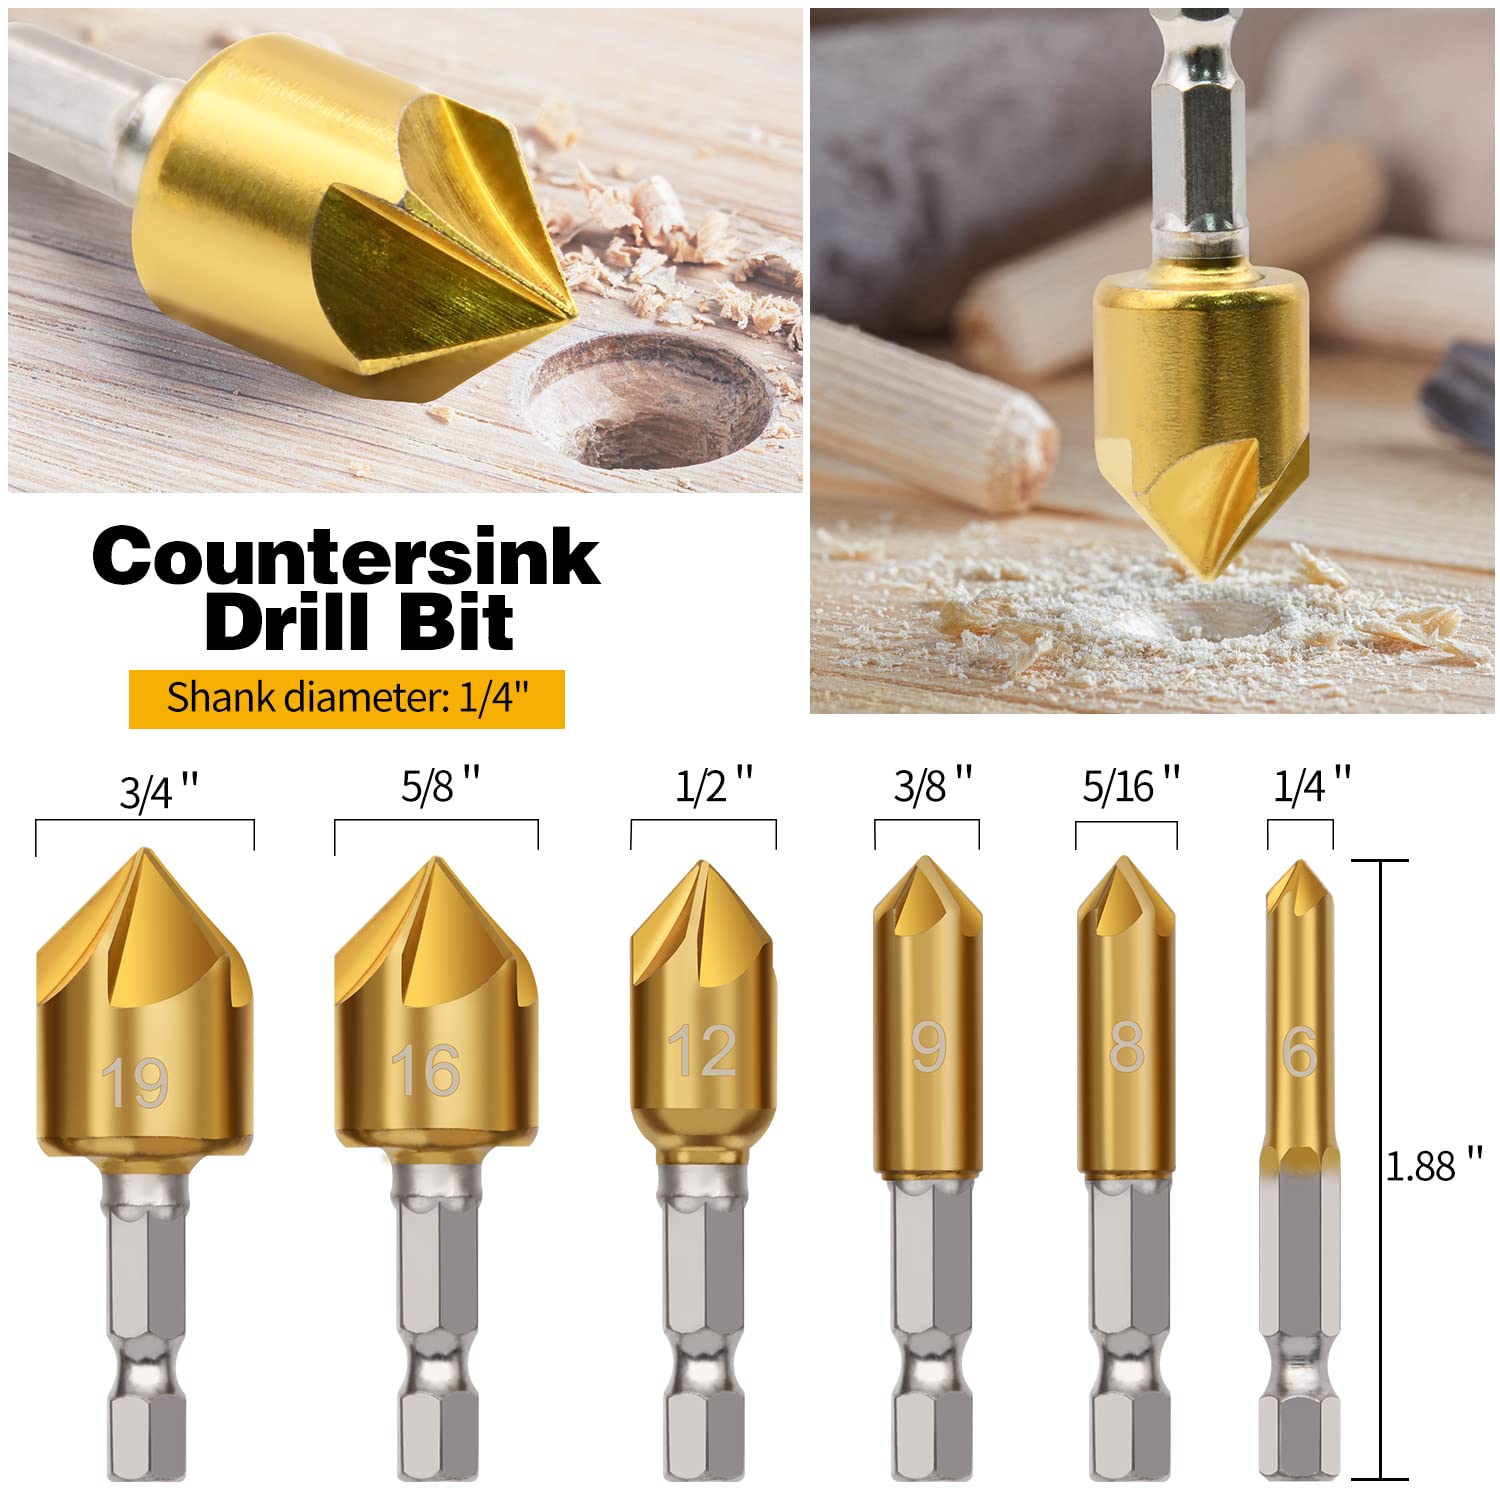 23pcs Woodworking Chamfer Drilling Tool Set, Including 7pcs 3-Point Countersink Drill Bit, 8pcs Wood Plug Cutters, 6pcs Countersink Drill Bits, 1pcs L-Wrench, 1pcs Center Punch for Wood